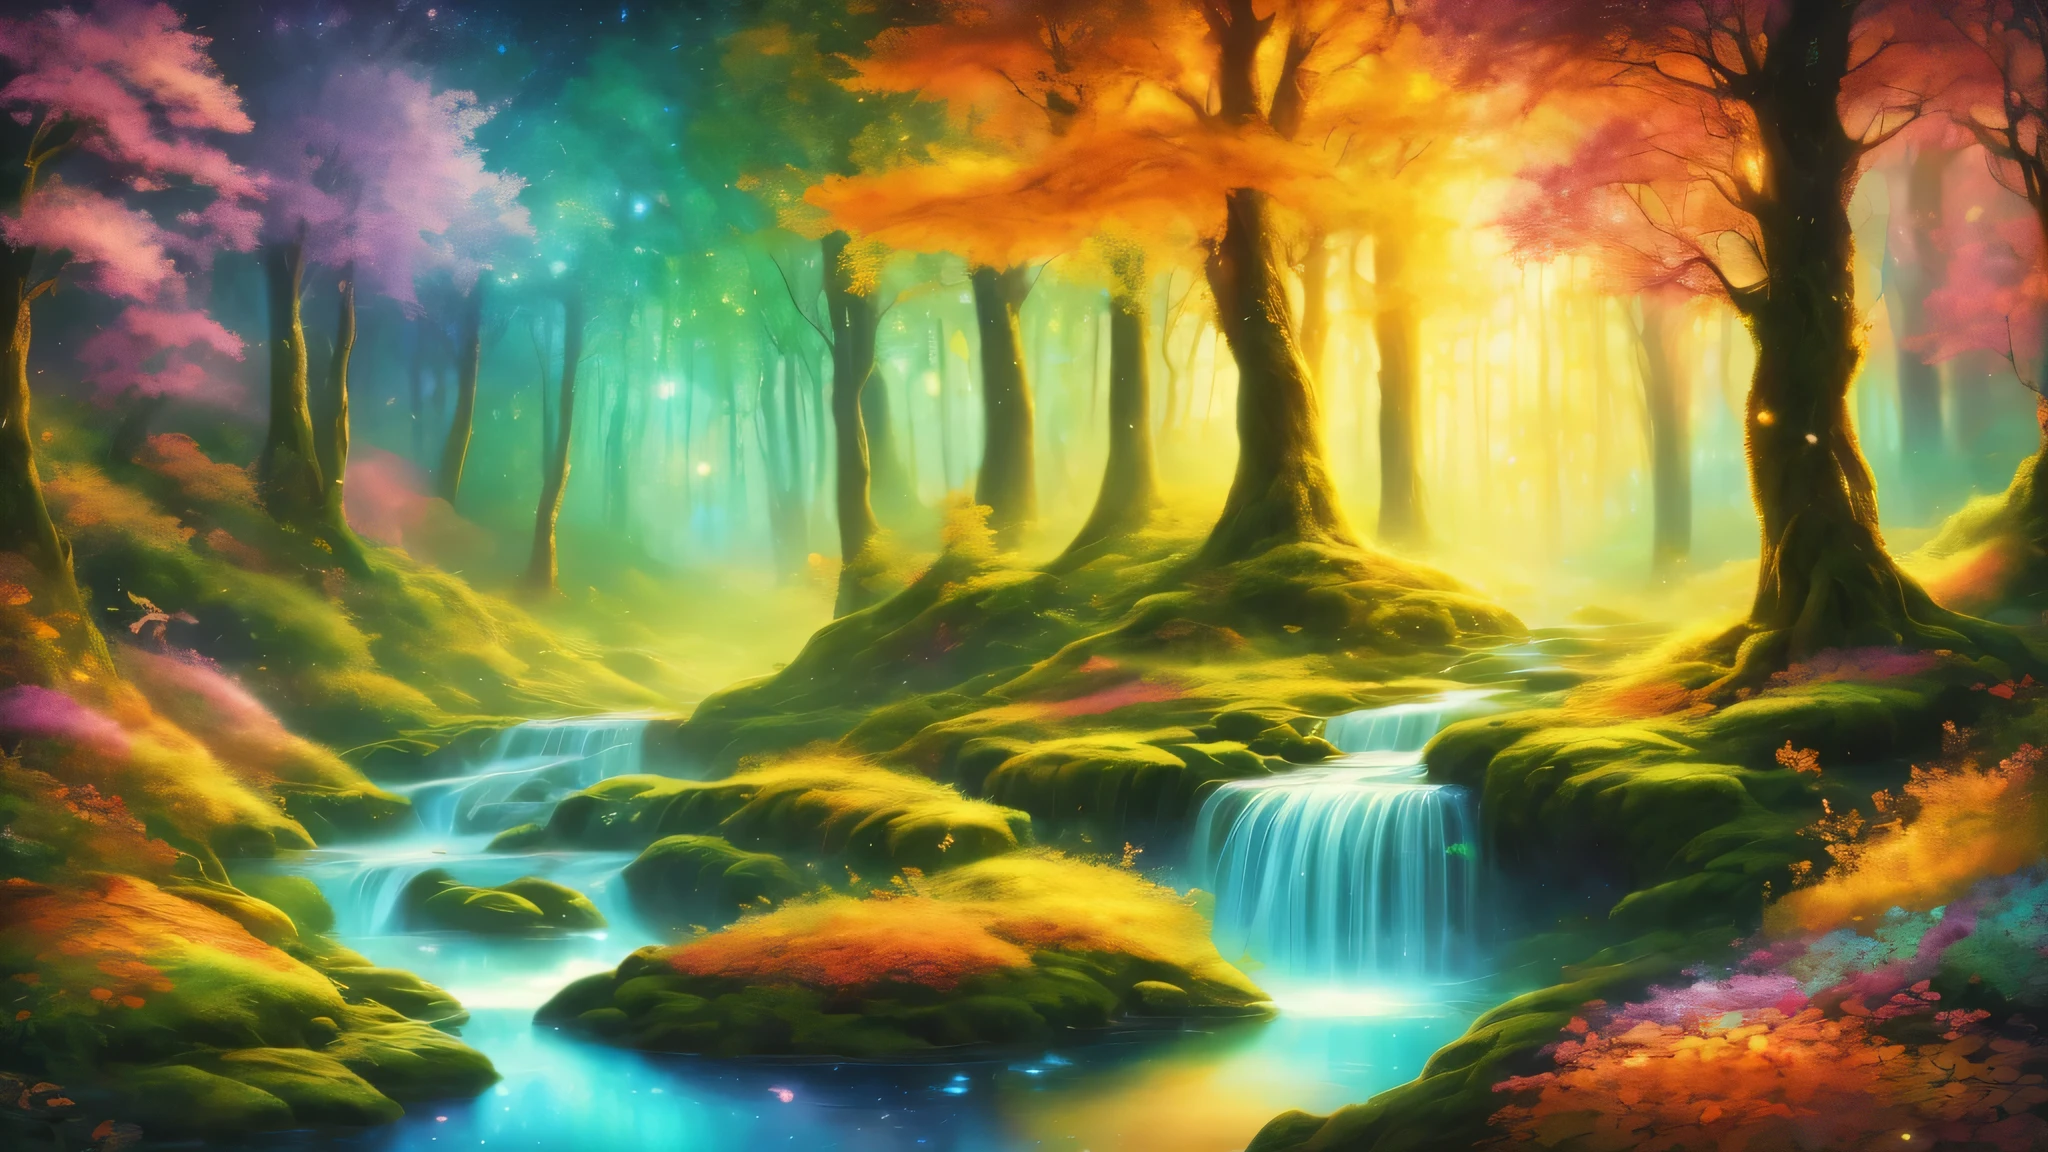 digital art,forest,Landscape painting,painting,forestの奥深く,深い緑のforest,beautifulforest,weak light,Tyndall effect,masterpiece,Oil paints,intricate details,T-Masterpiece,Inspiration,beautiful,rendering,masterpiece,最高masterpiece,Art work using light,Artistic,get used to it,Microparticles,flame,stream,Morning haze,early morning,,Gradation,masterpiece,最高masterpiece,highest quality,rendering,rich colors,colorfulな呪文を唱える,dream-like,Detailed details,In detail,,bright colors,beautiful光と影,magic,dream-like,Inspiration,beautiful,rendering,colorful,wonderful,particles of light,それにget used to it,masterpiece,最高masterpiece,Art work using light,Artistic,それにget used to it,Tyndall effect